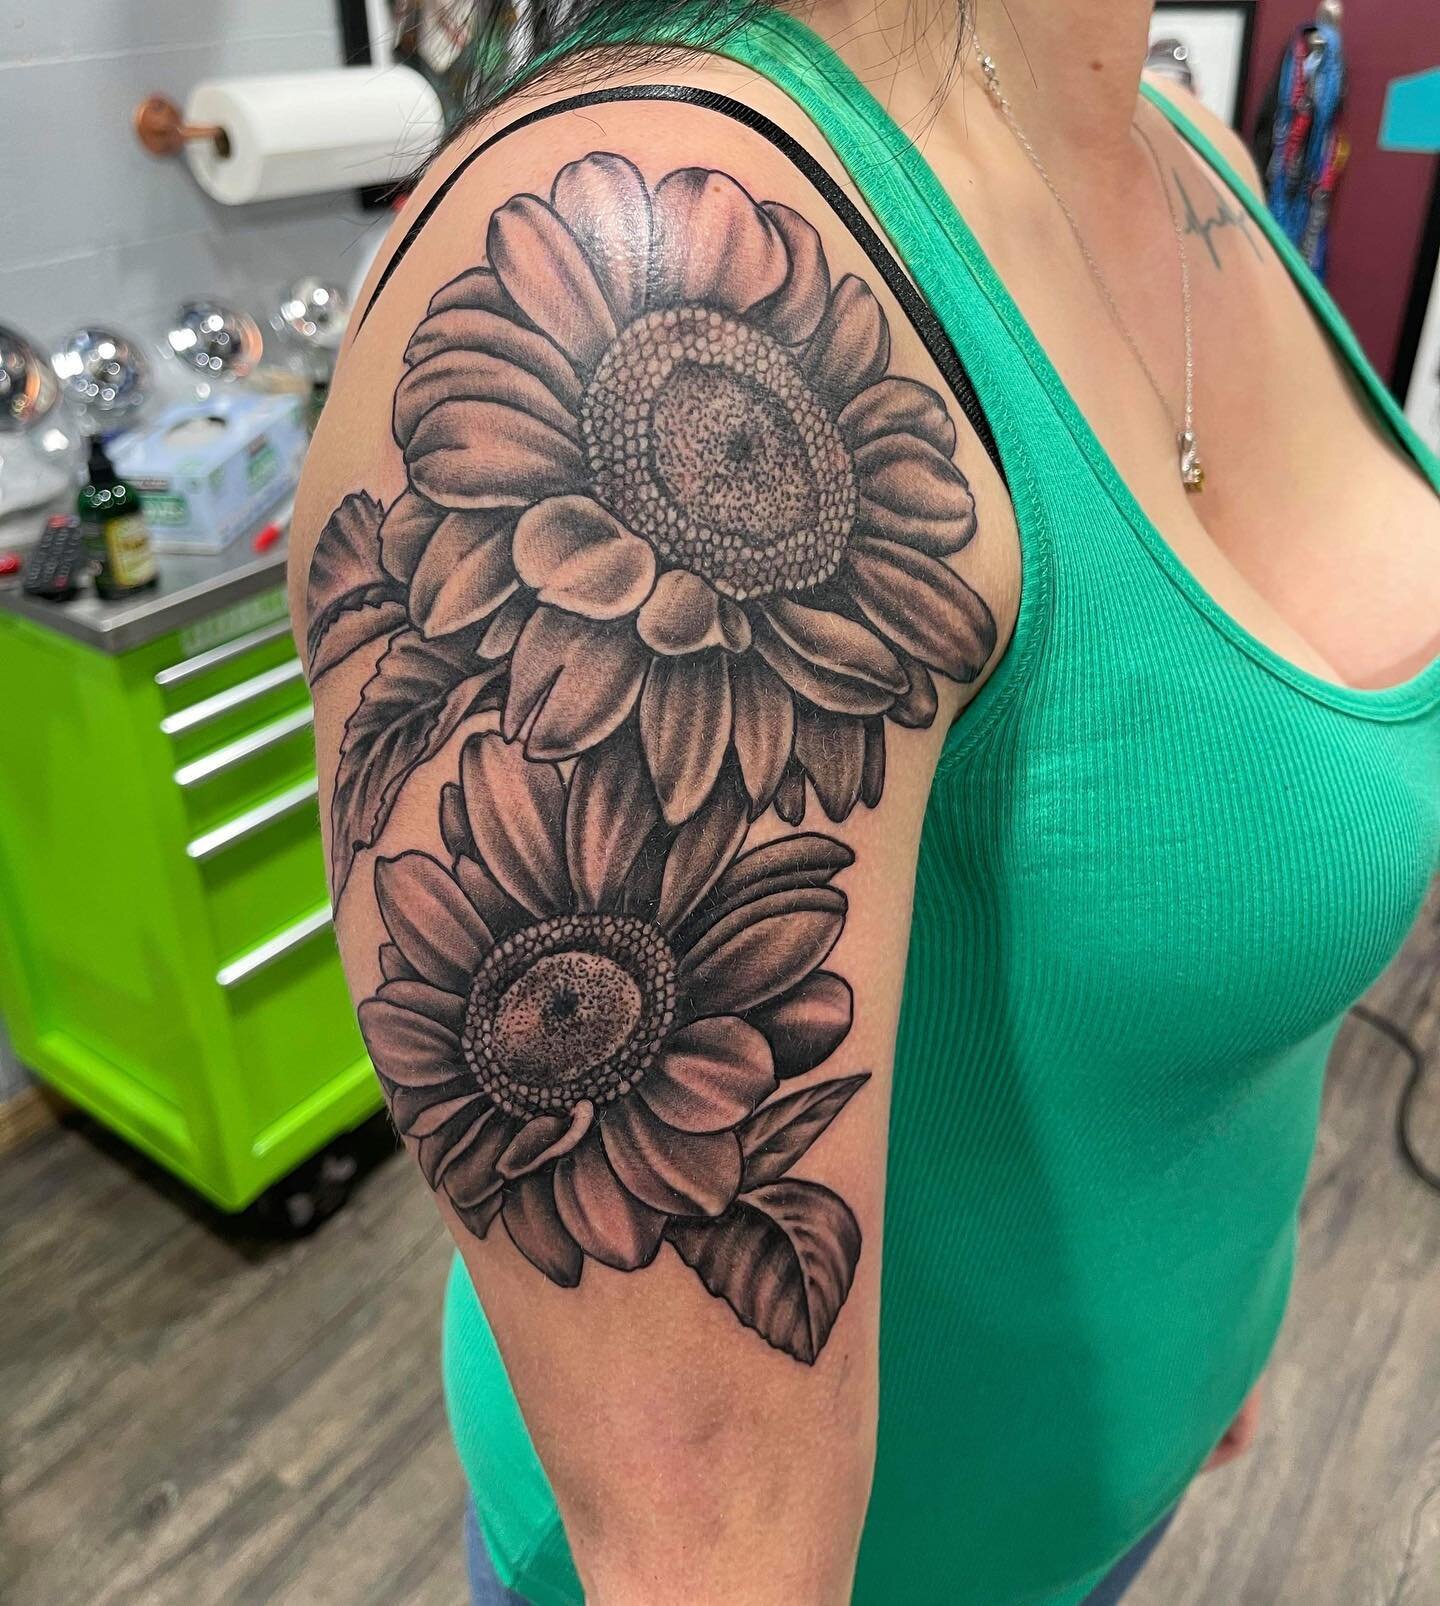 Always have fun doing some flowers! Would love to do some more like this! 

To make an appointment or talk tattoo ideas please email: mattbooking@lightningrevival.com 
⚡️ 
Proud @electrumsupply artist
⚡️ 
#tattoos #inkstagram #tattooed #newtattoo #ar